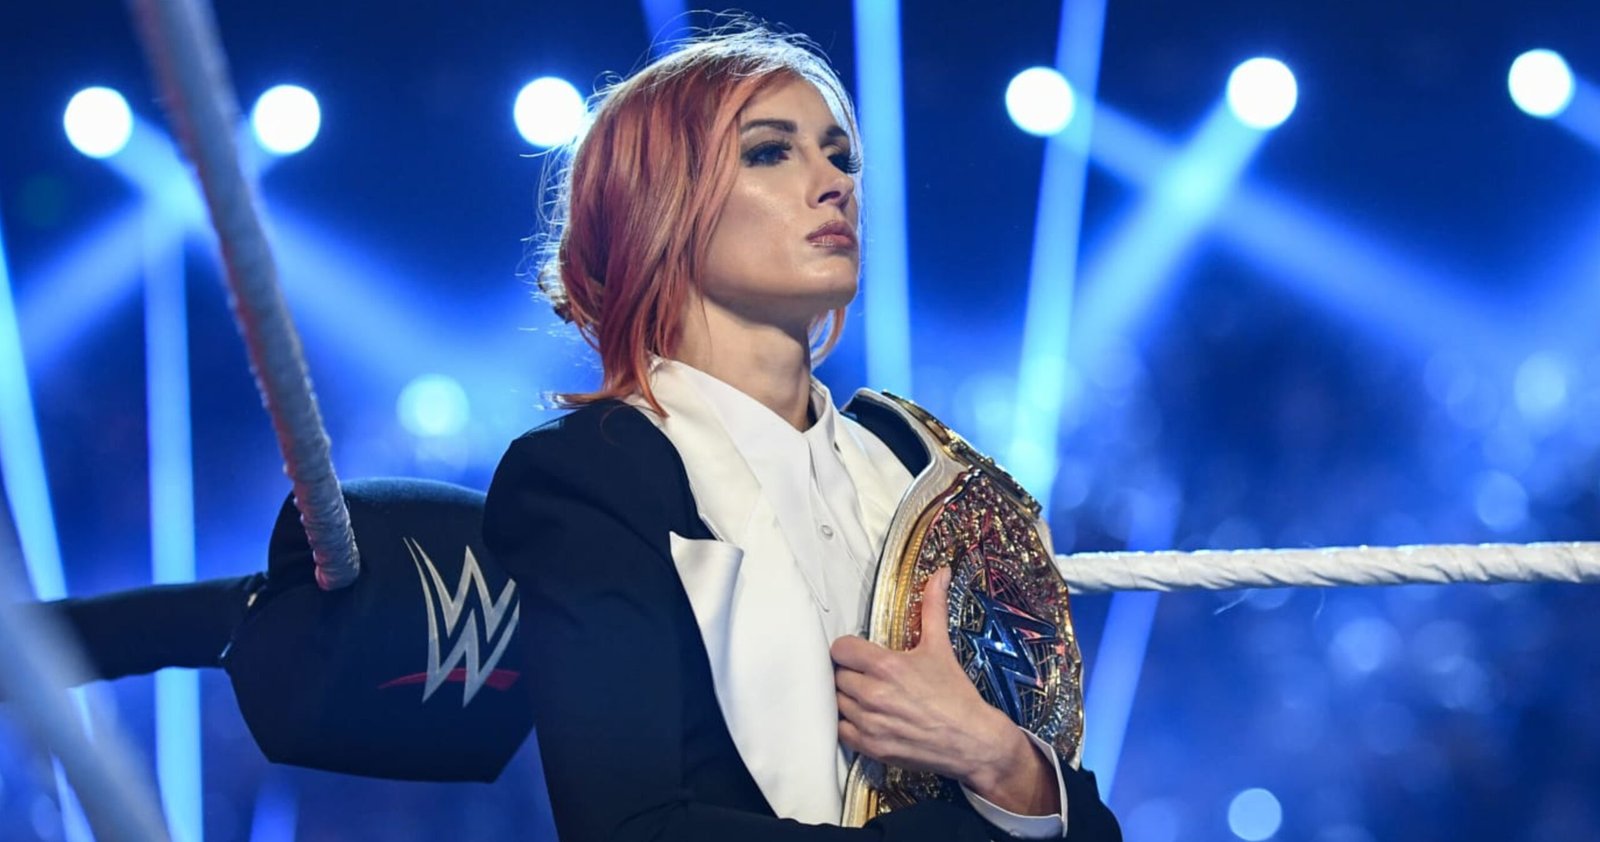 WWE Rumors: Becky Lynch to Take ‘an Prolonged Go away’ amid Contract Buzz After Loss